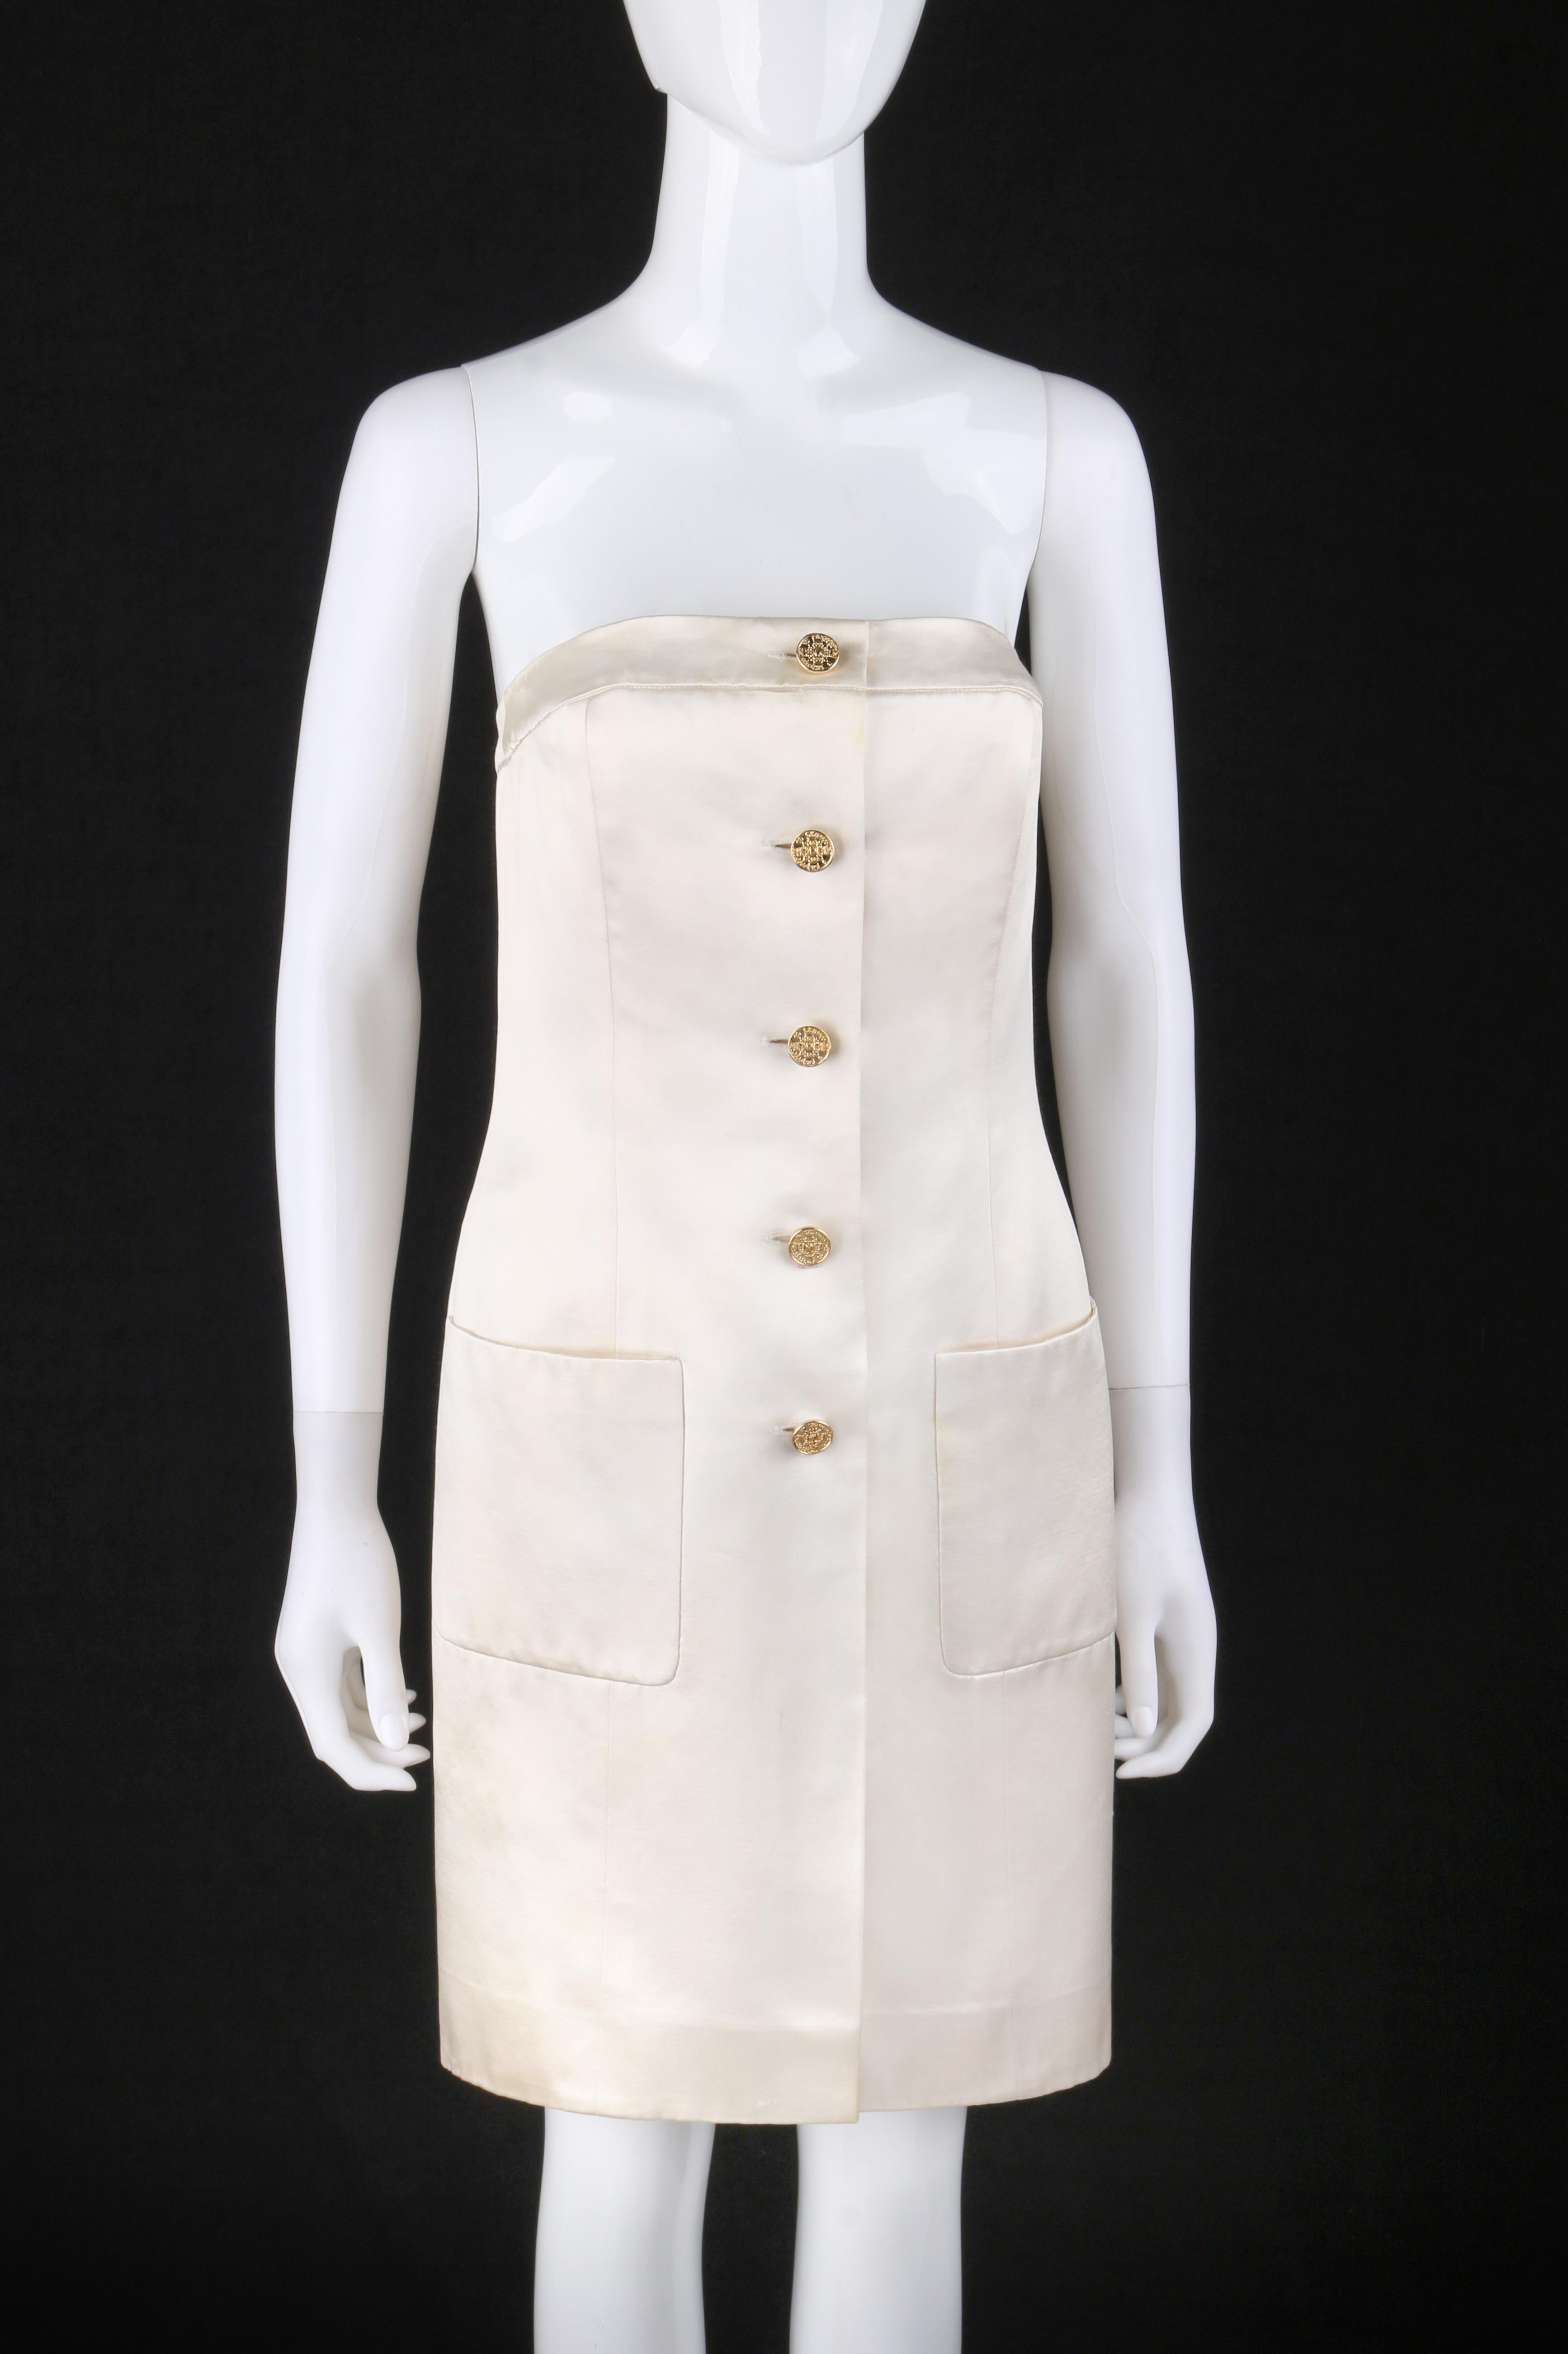 Vtg. CHANEL c.1980’s Ivory Champagne Satin Silk Button Up Strapless Dress
 
Circa: 1980’s 
Label(s): Chanel Boutique  
Style: Strapless dress
Color(s): Ivory / Champagne 
Lined: Yes
Unmarked Fabric Content: Silk
Additional Details / Inclusions: